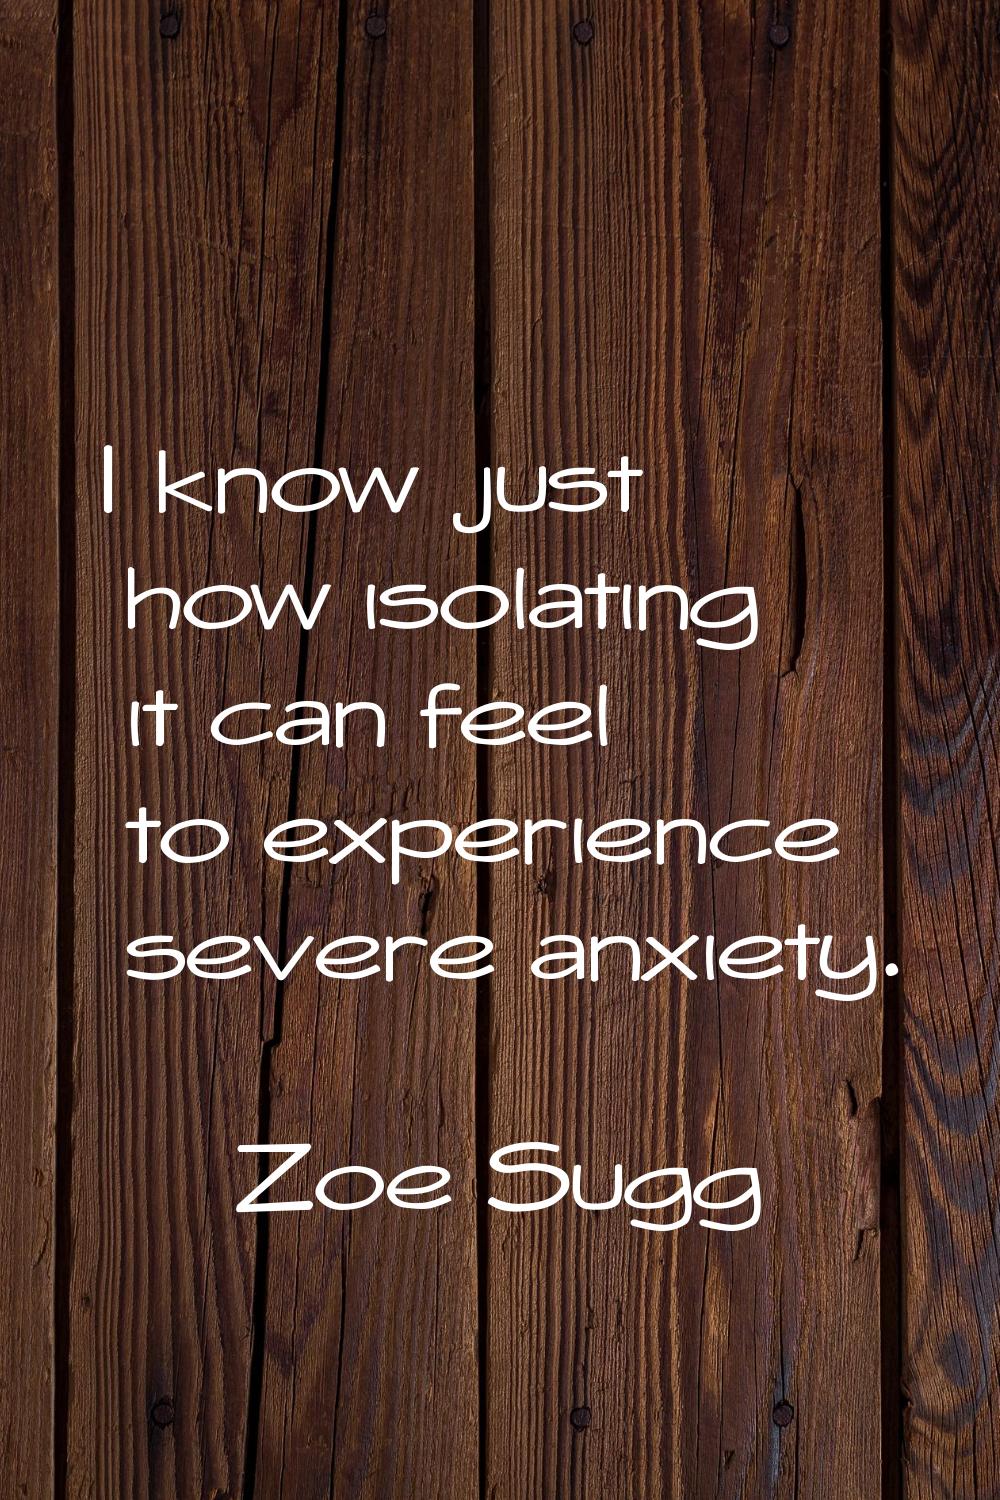 I know just how isolating it can feel to experience severe anxiety.